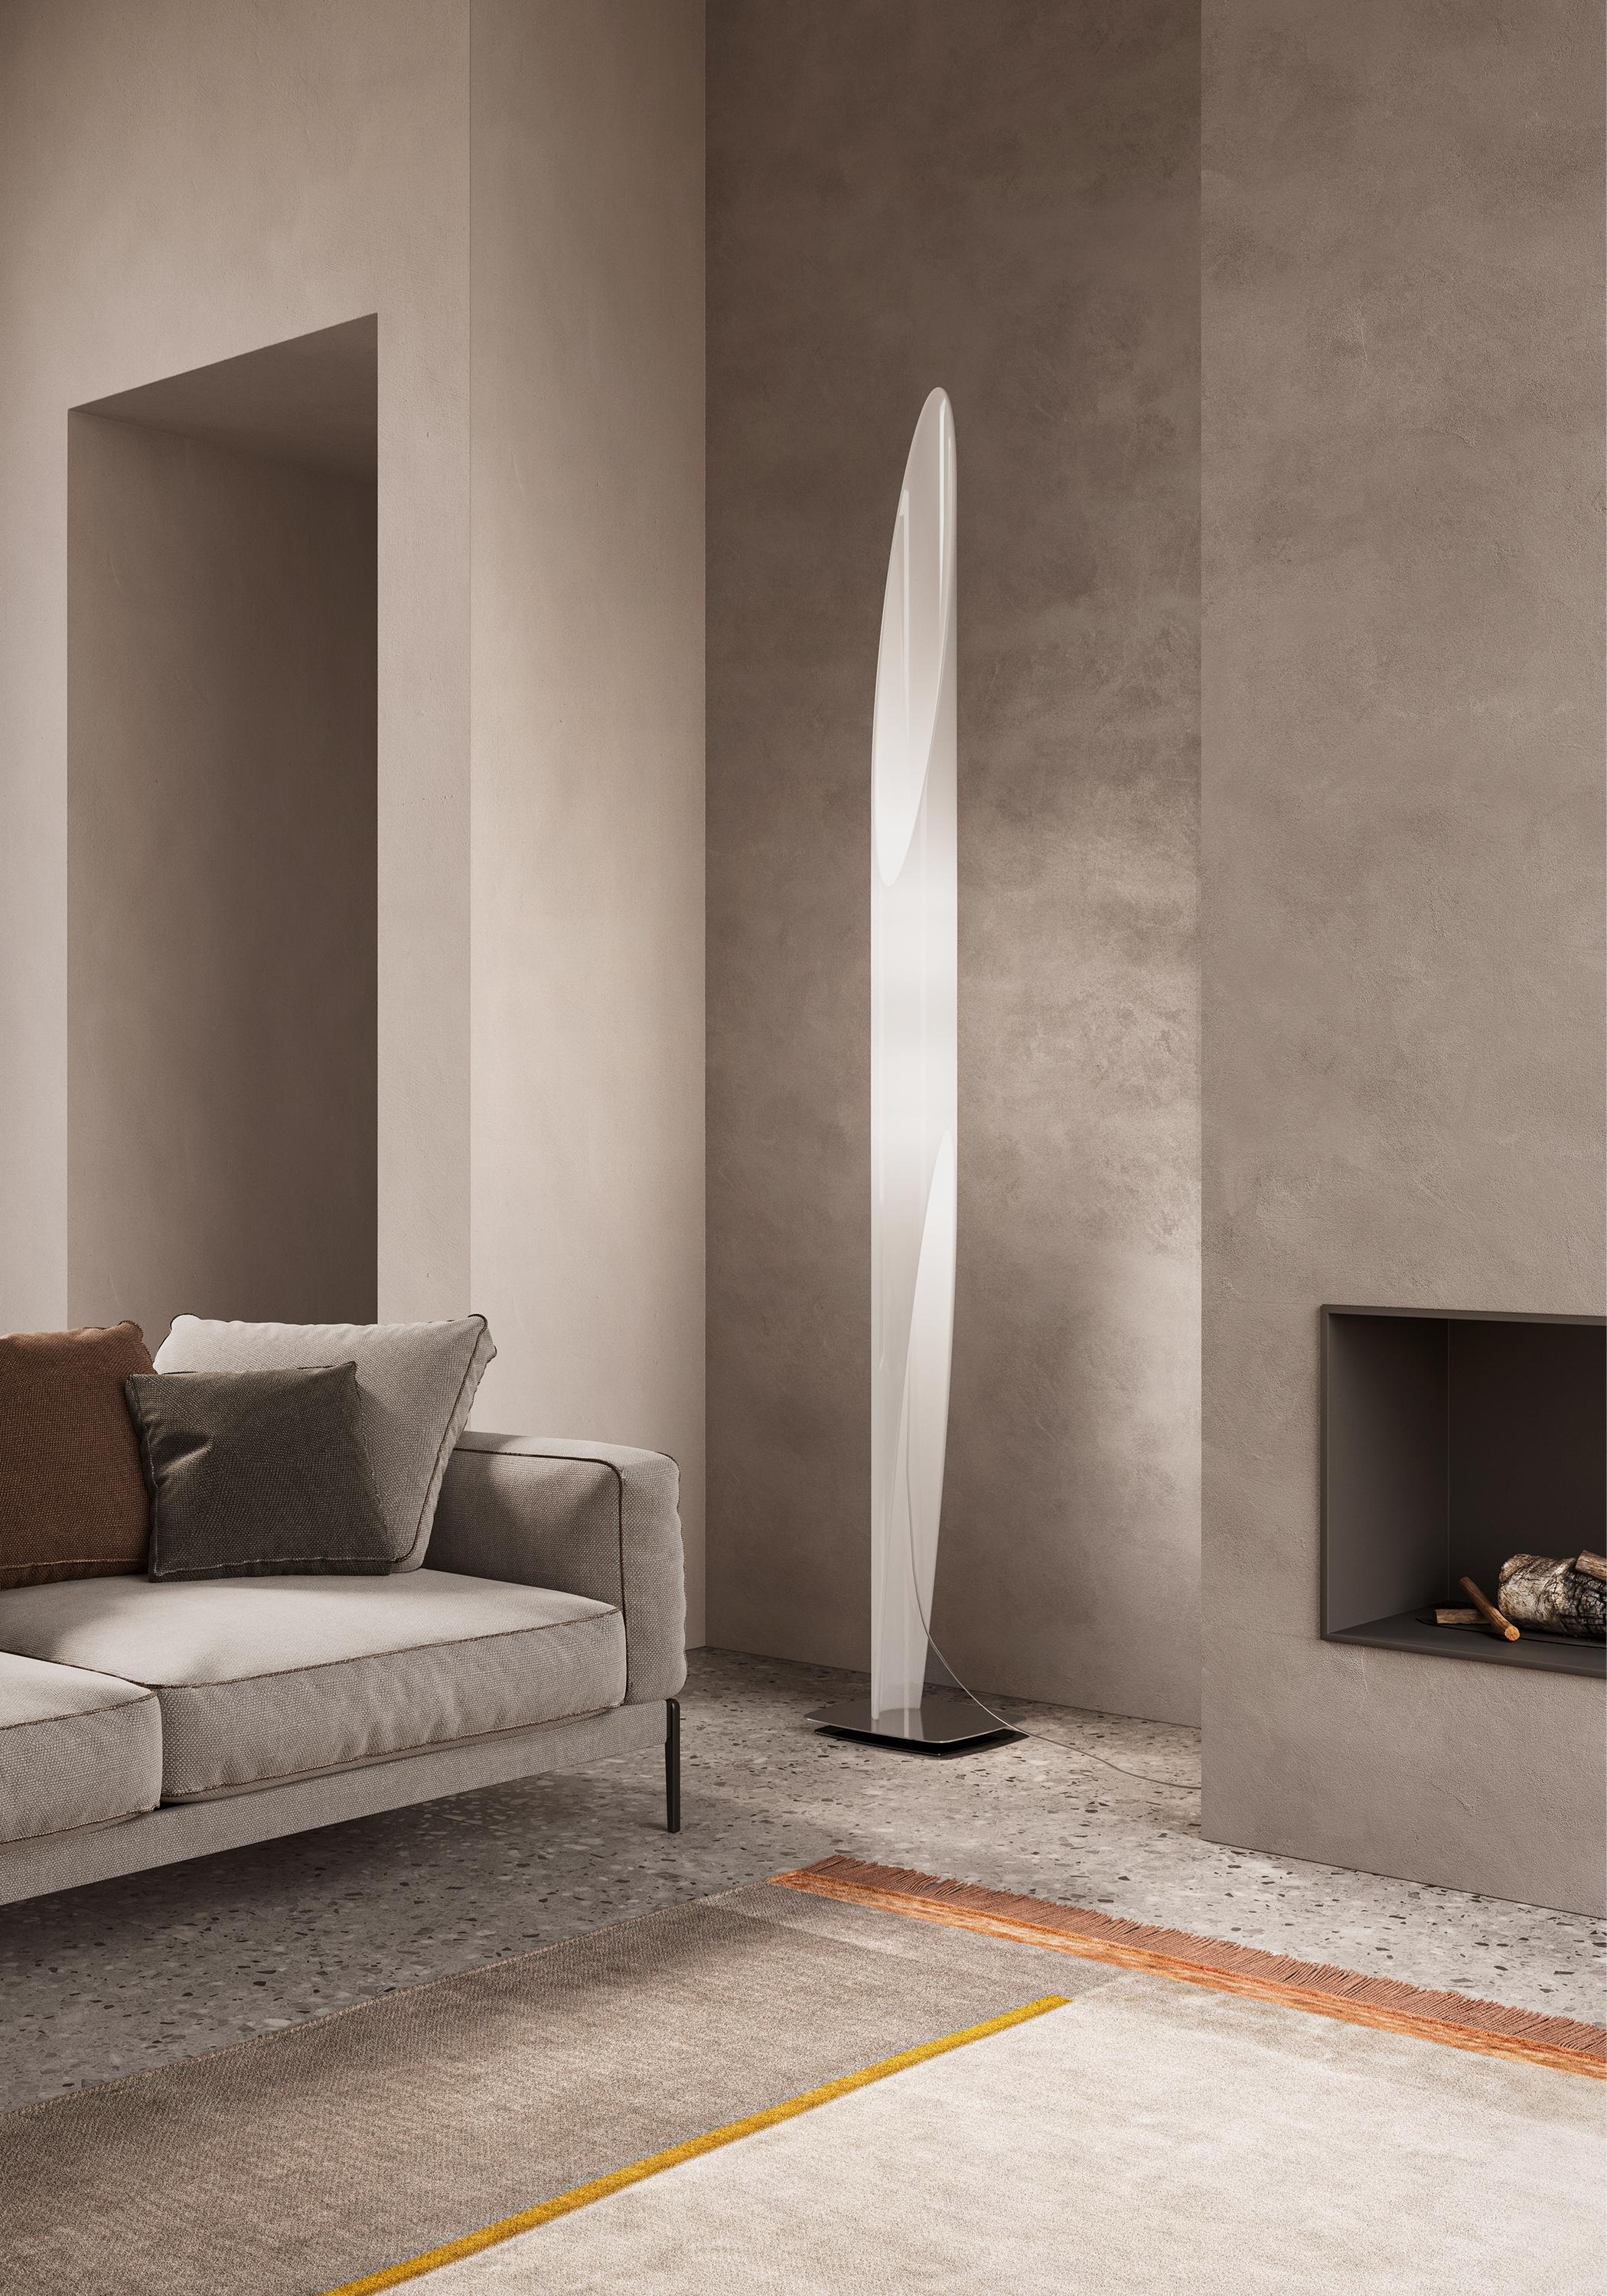 Shakti 200

Industrial language finds an unusual expression and plays on simple, clean lines. The tubular diffuser, sliced diagonally at both ends, acquires a new impetus. Formal purity for a floor lamp that is always up-to-date. Floor lamp with